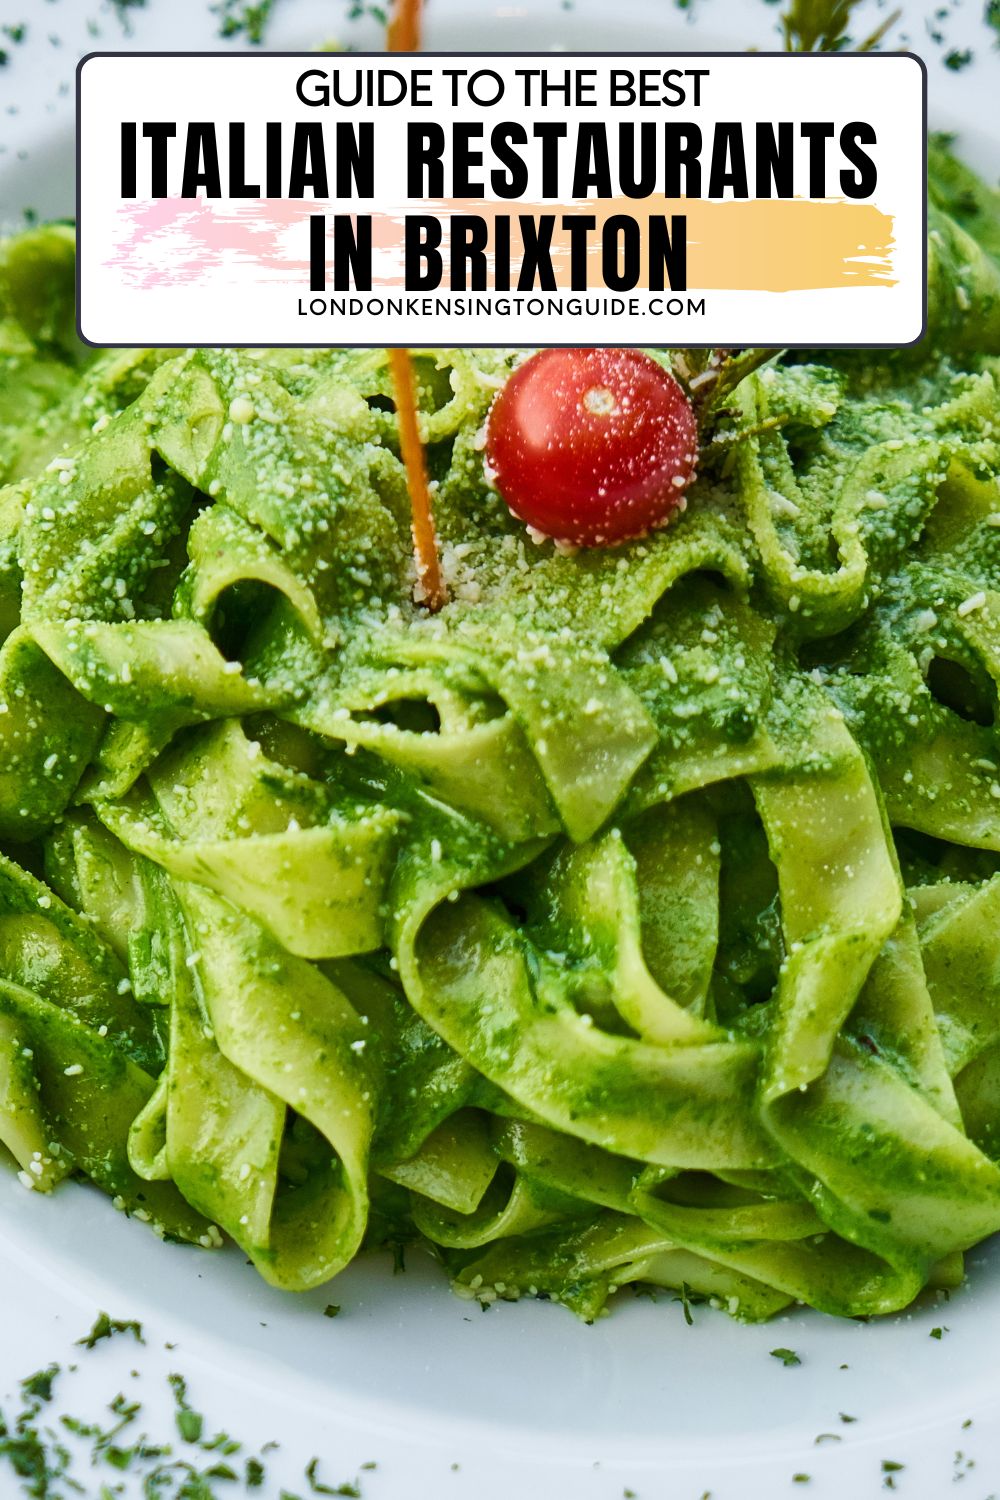 Guide to the best Italian restaurants in Brixton. Whether you are looking for a pasta place, Pizzeria or just want food Italian food. We have you covered! italian restaurants brixton | la nonna brixton | franzina trattoria brixton | pasta restaurant brixton | italian food brixton | italian restaurants in brixton | nice restaurants in brixton | restaurants near brixton | italian brixton